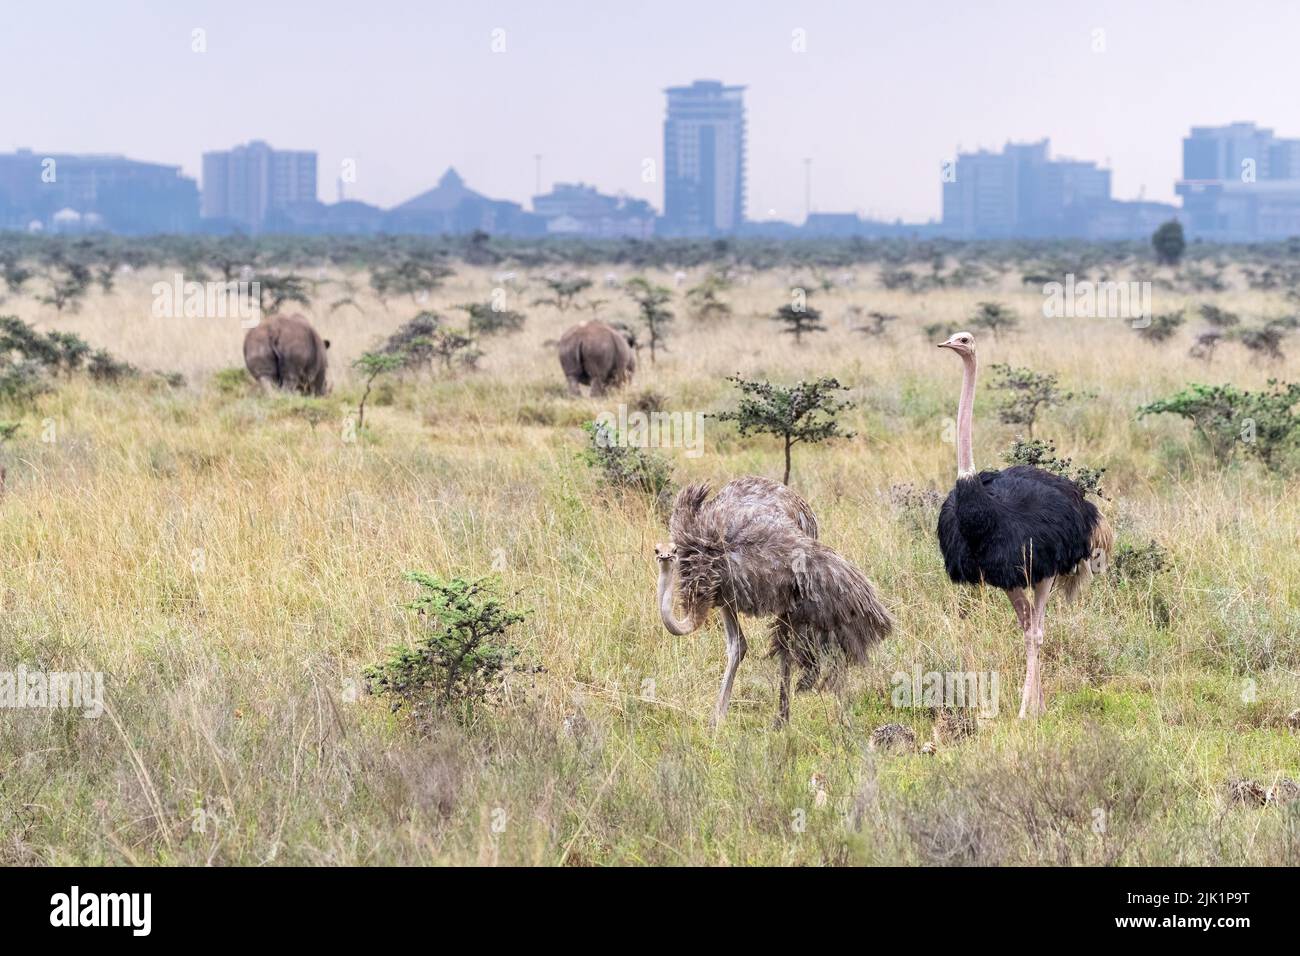 Male and female ostrich pair,  struthio camelus, with two white rhinos, ceratotherium simum, Nairobi National park. The city skyline can be seen in th Stock Photo